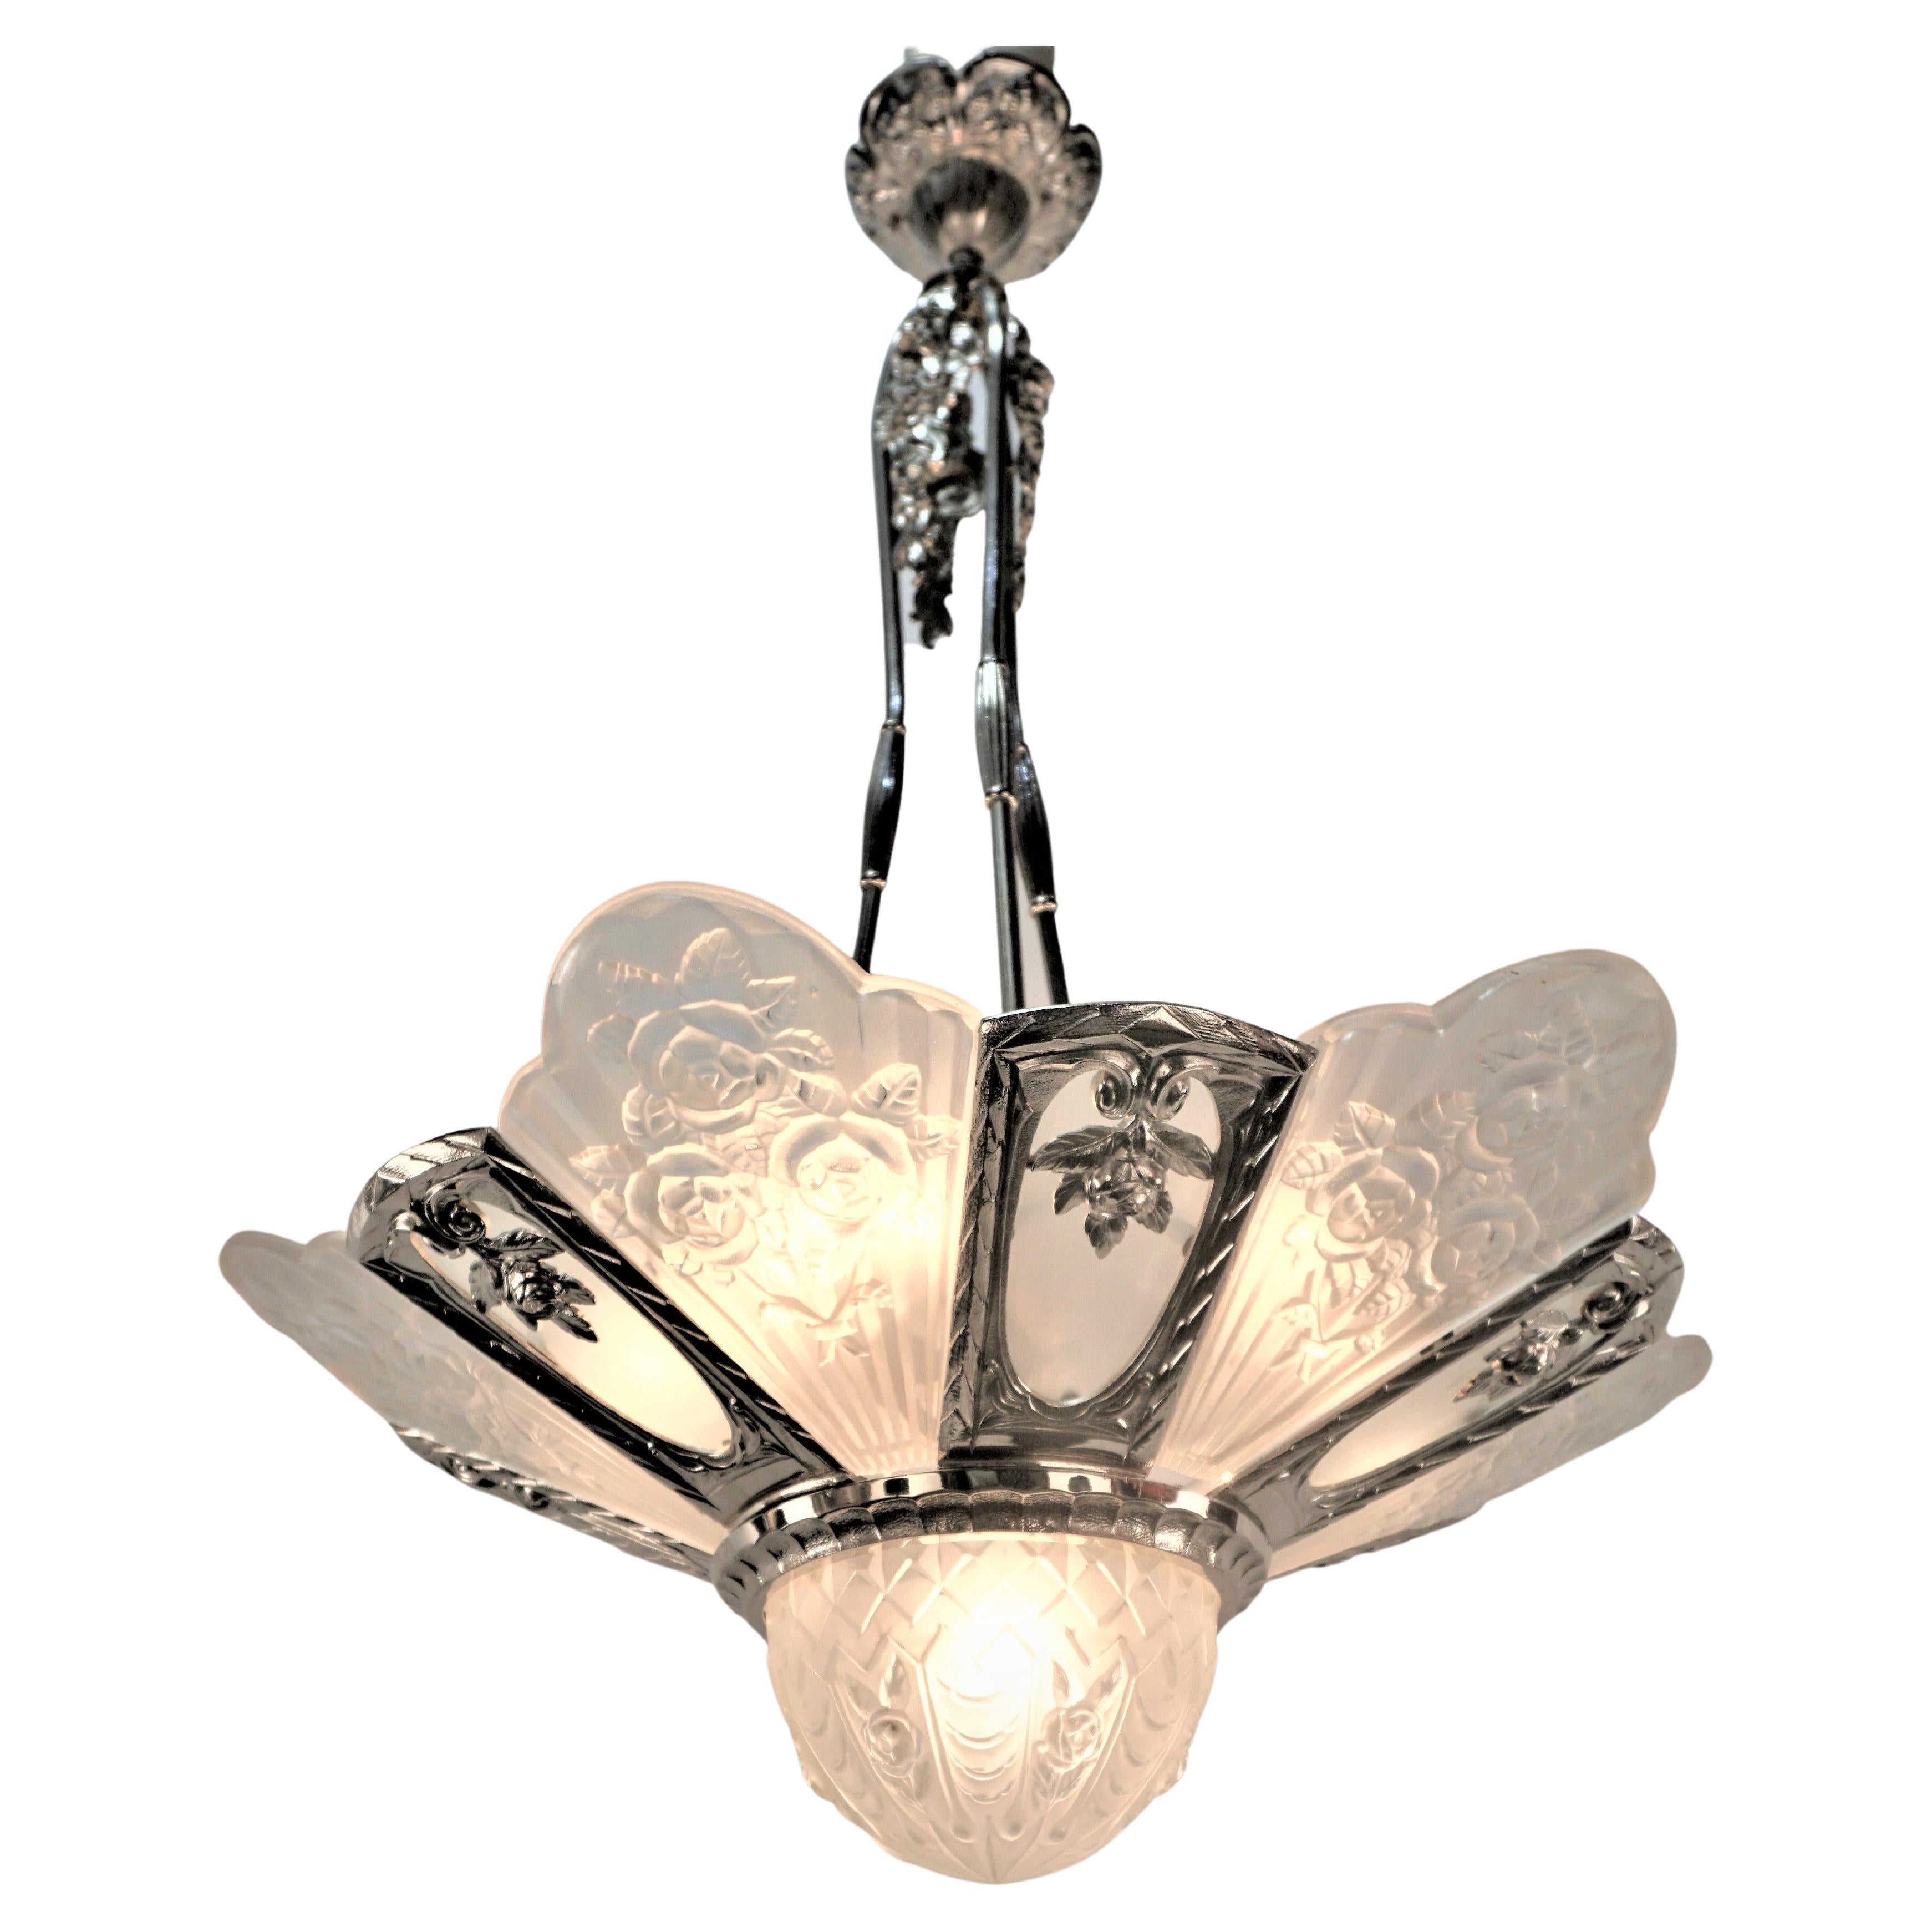 French 1920's Art Deco chandelier by Gilles For Sale